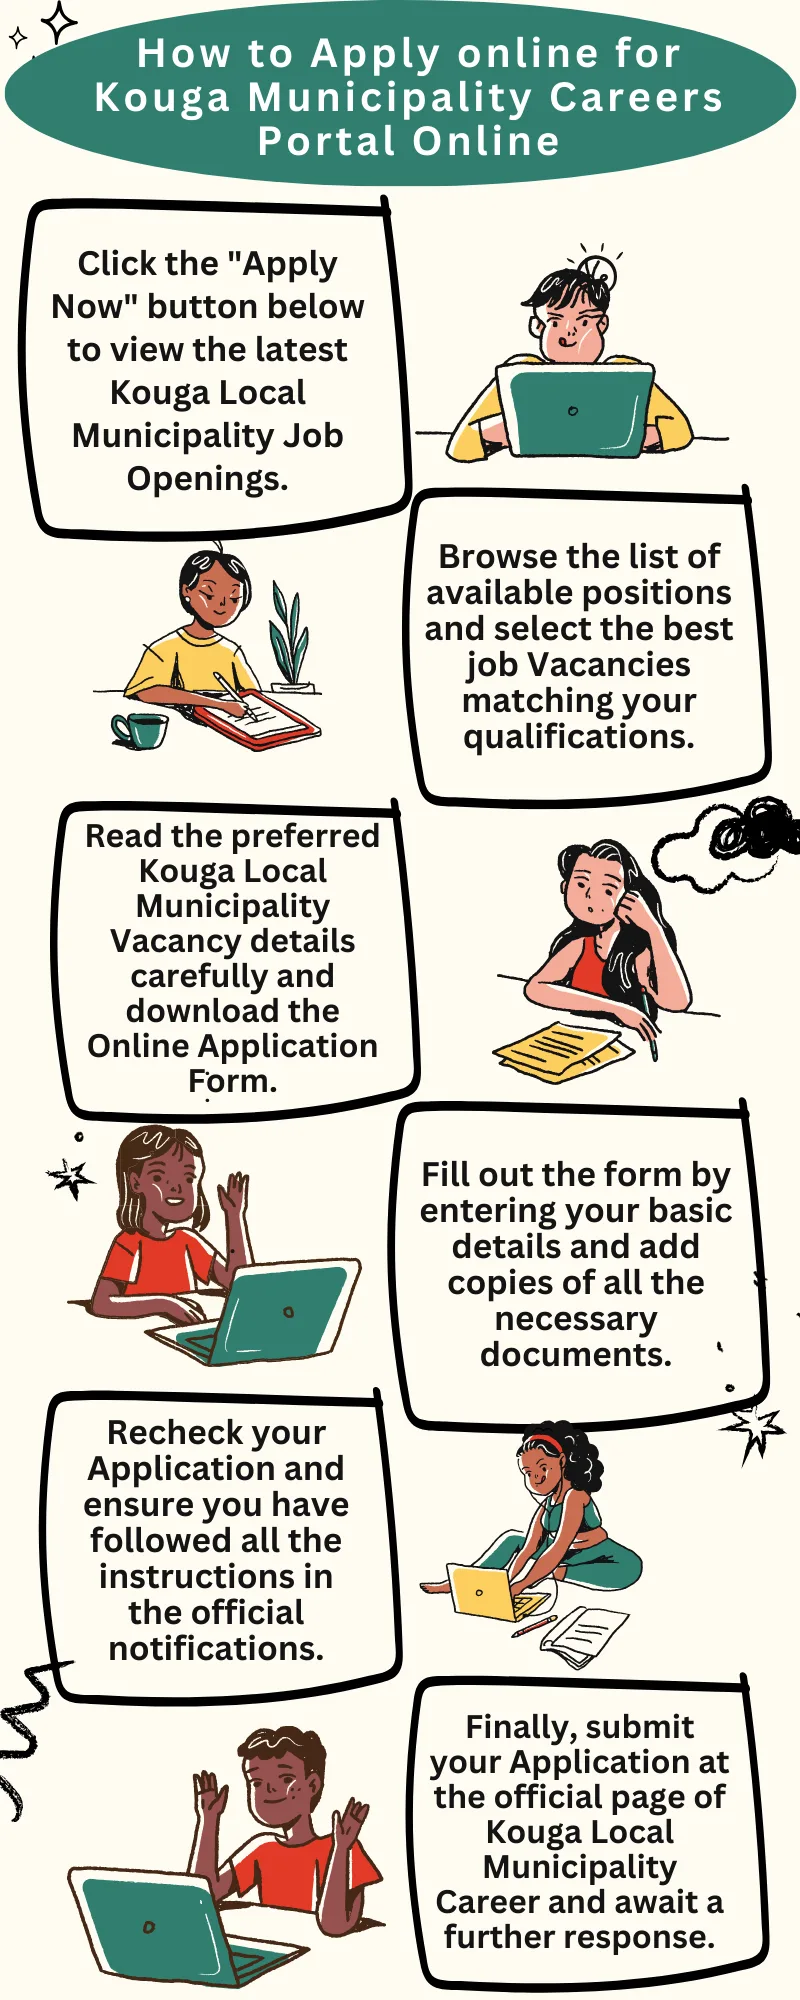 How to Apply online for Kouga Municipality Careers Portal Online